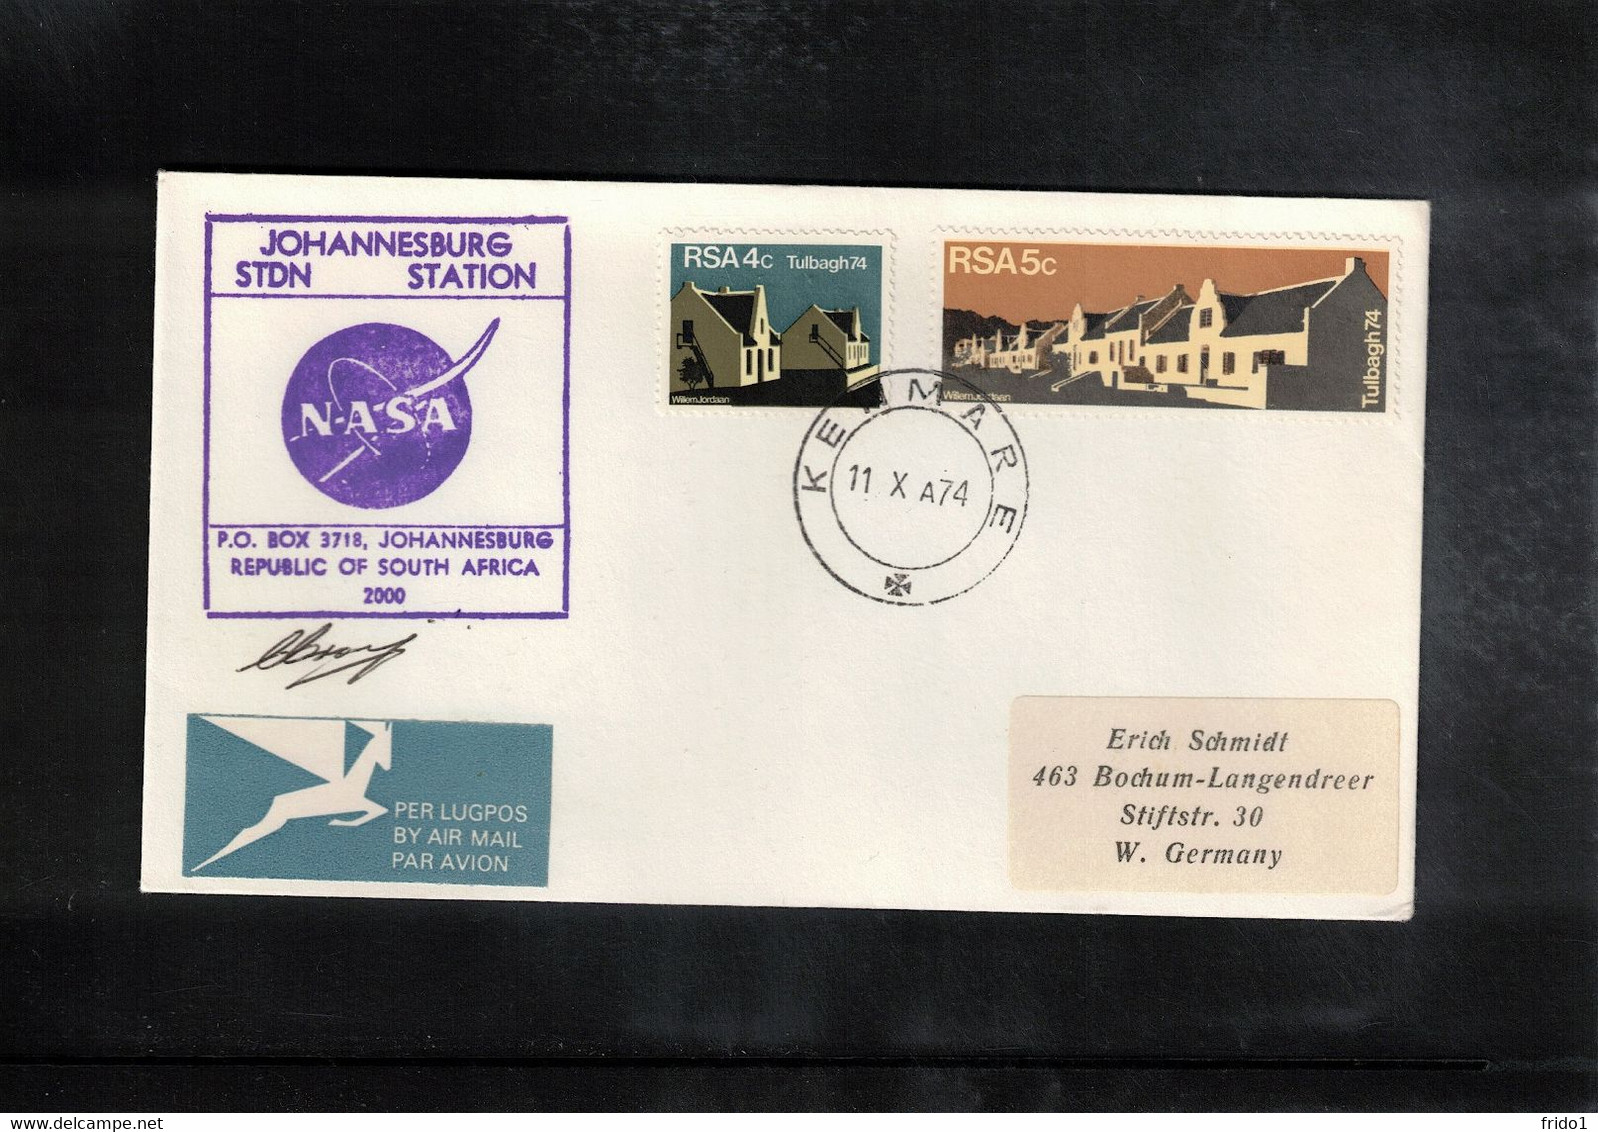 South Africa 1974 Space / Raumfahrt Johannesburg STDN Tracking Station  Interesting Cover - Africa